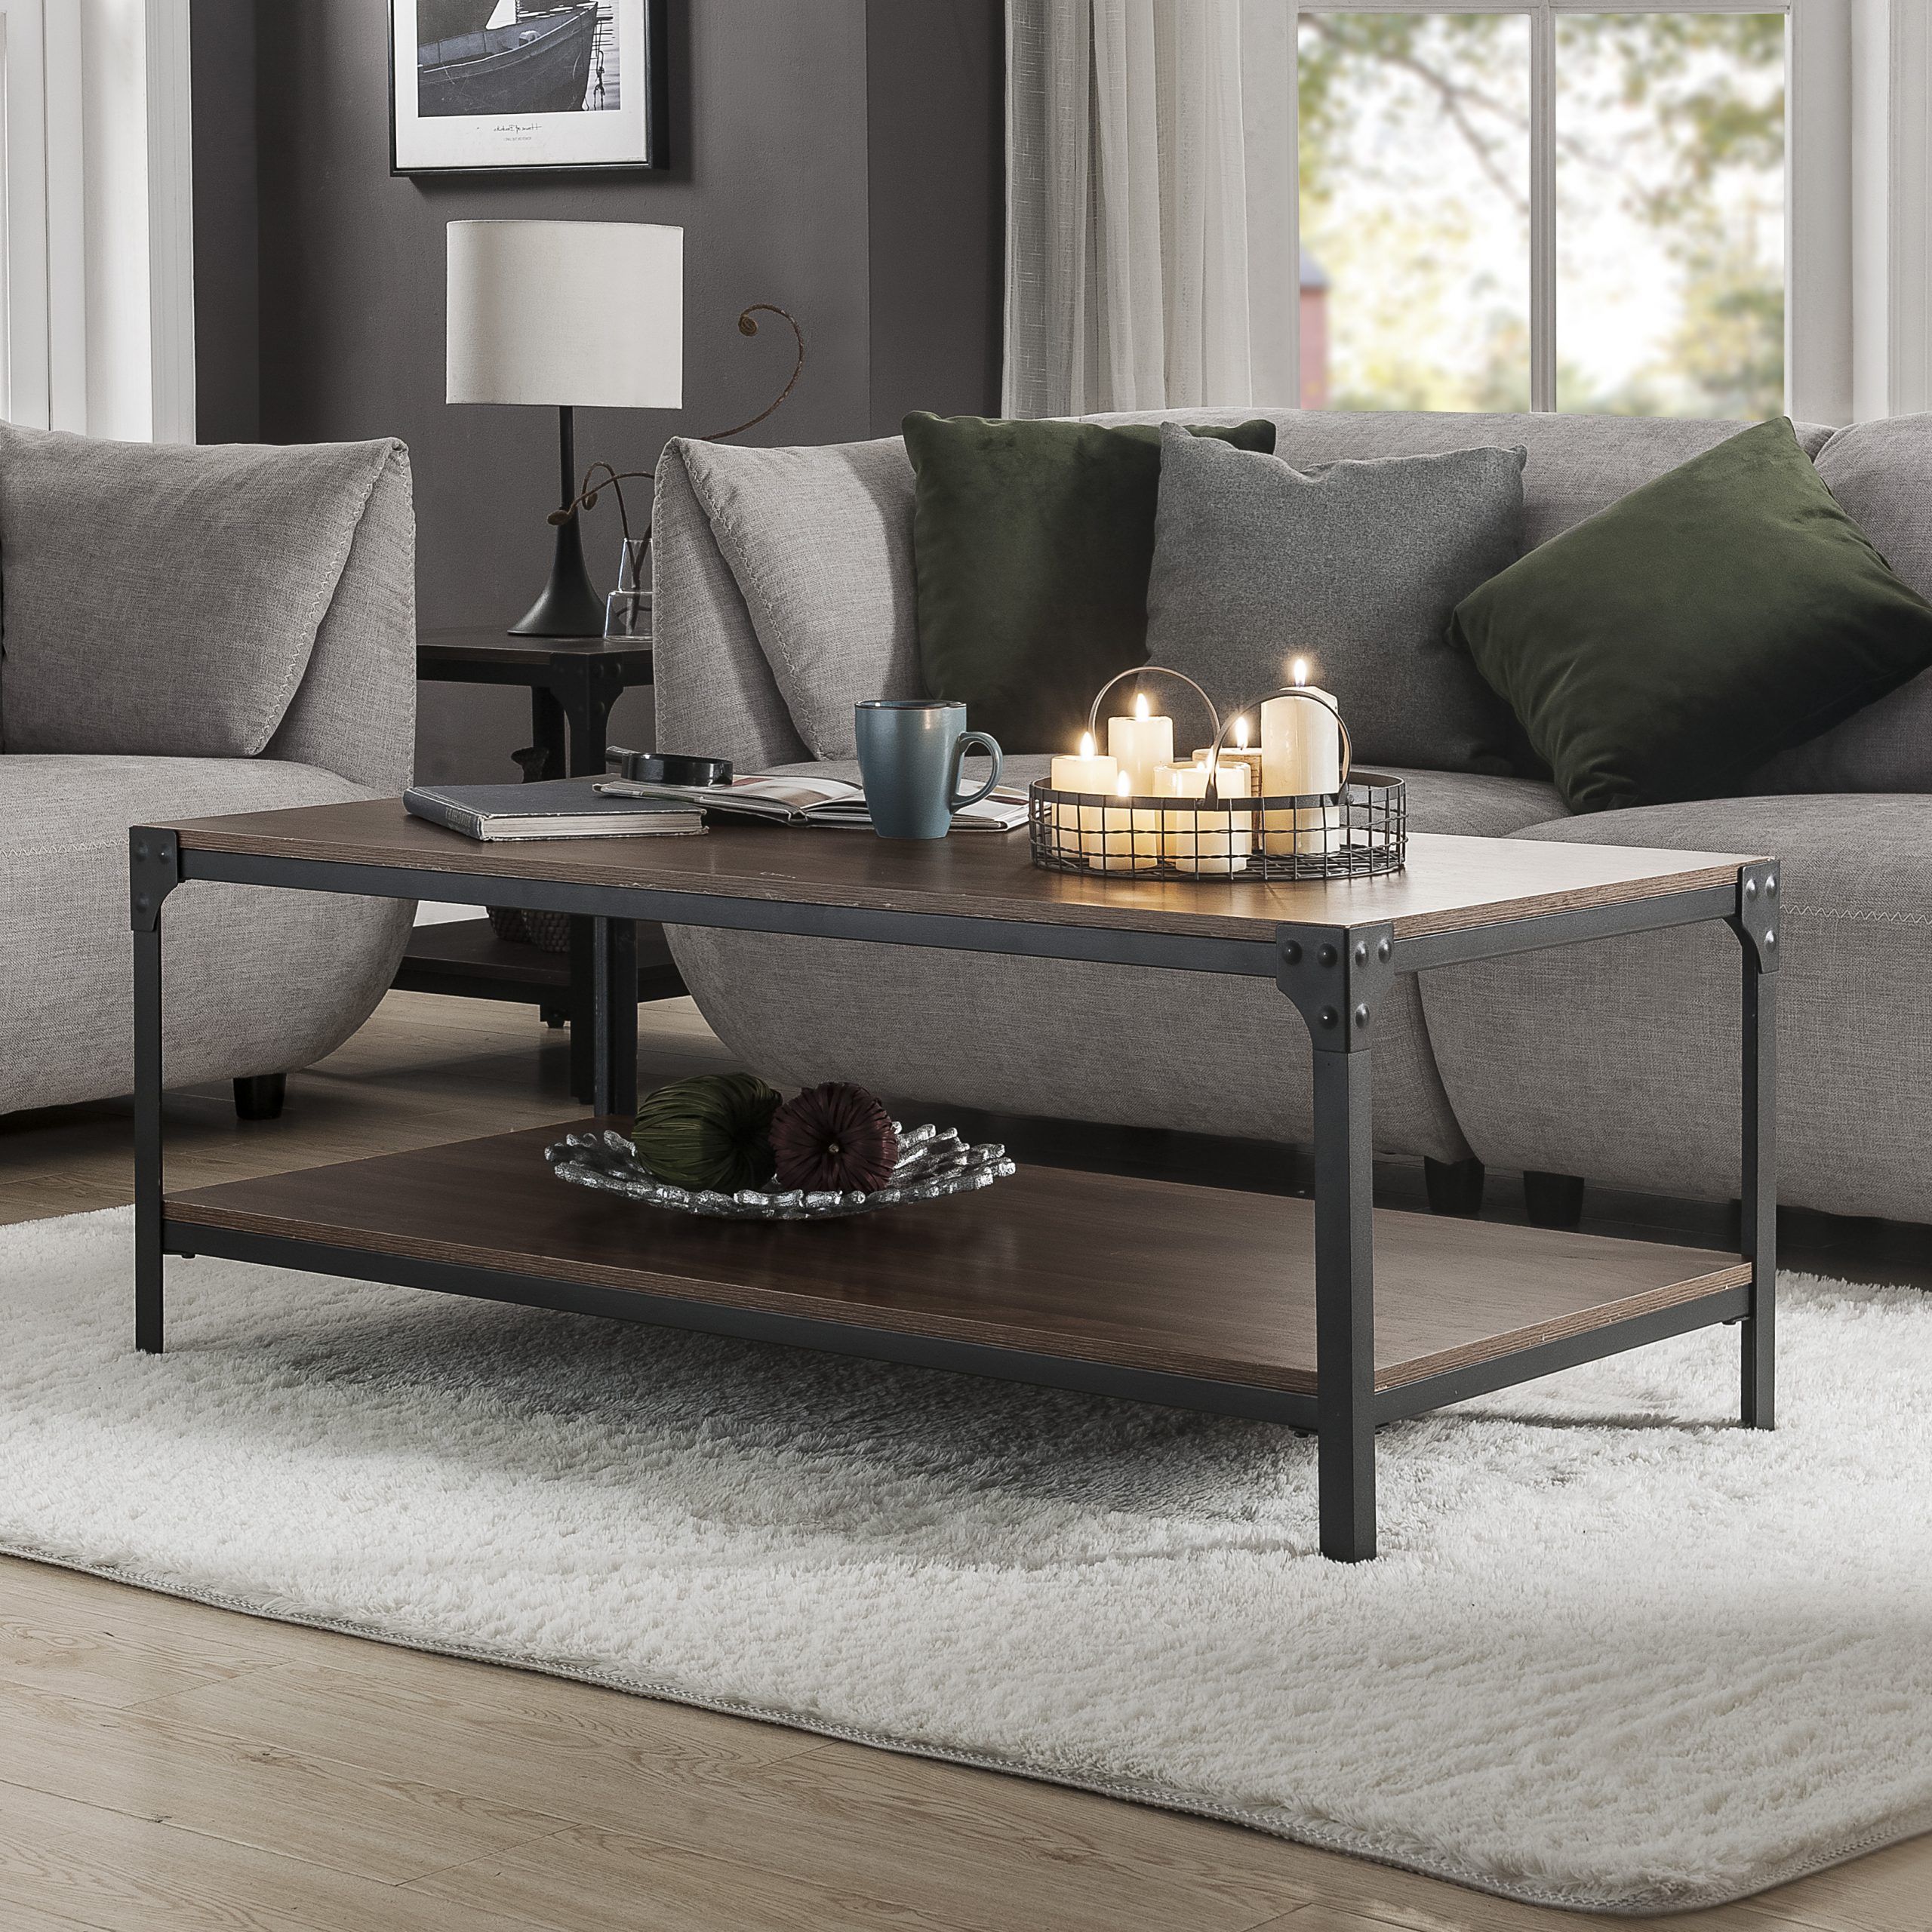 End Tables For Living Room, Mid Century Rustic Coffee With Regard To 2019 3 Piece Shelf Coffee Tables (View 3 of 20)